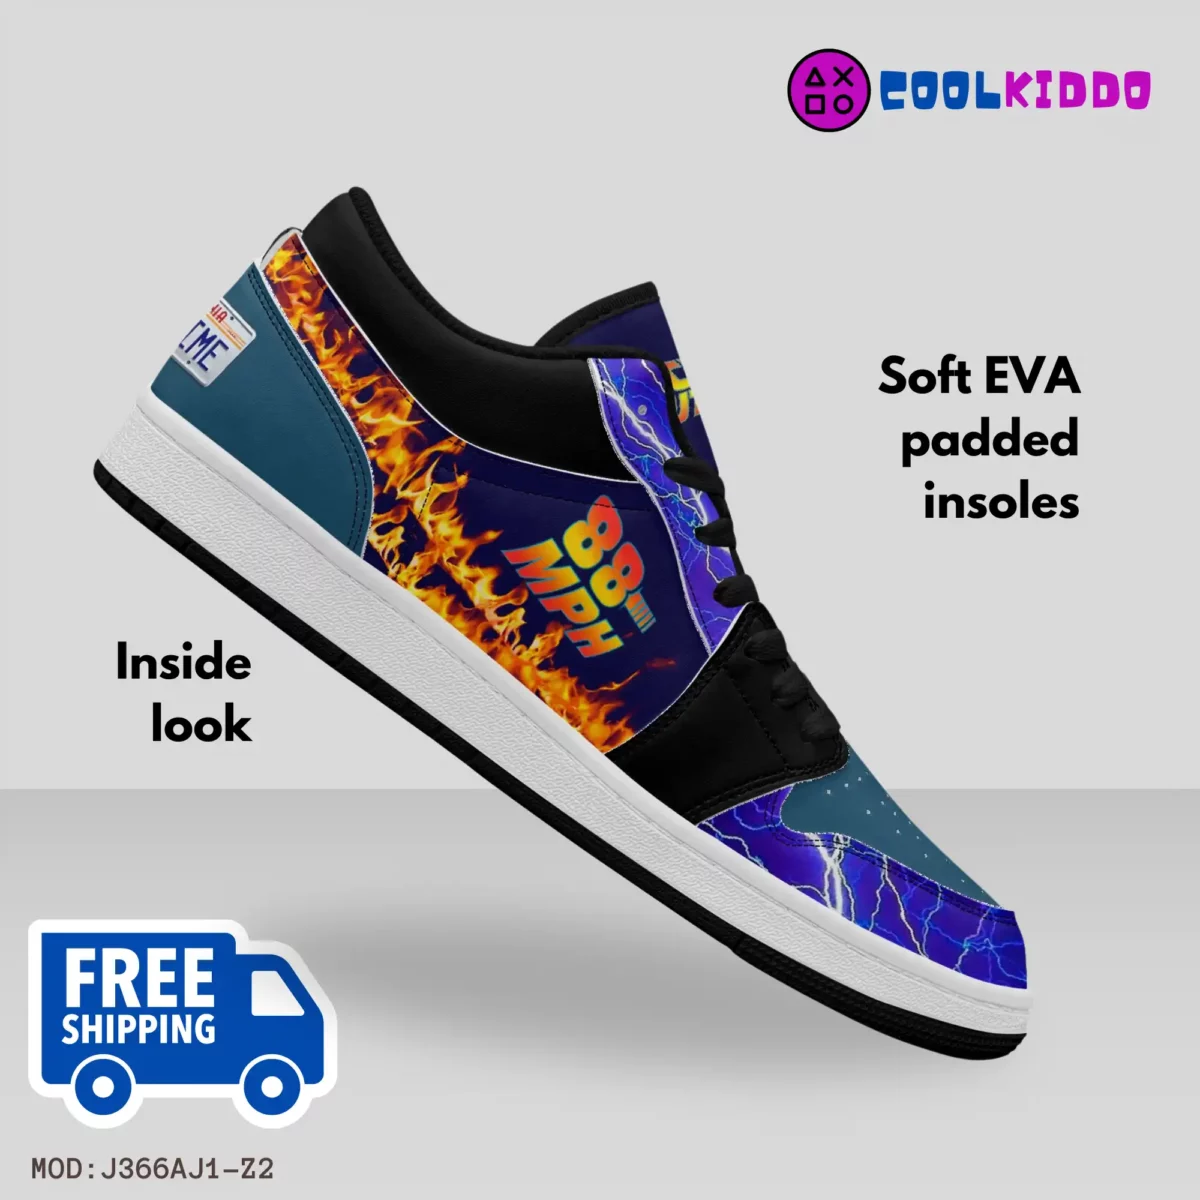 Back to the Future Movie Inspired Low-Top Leather Sneakers – Vintage Print Shoes for Youth/Adults Cool Kiddo 16